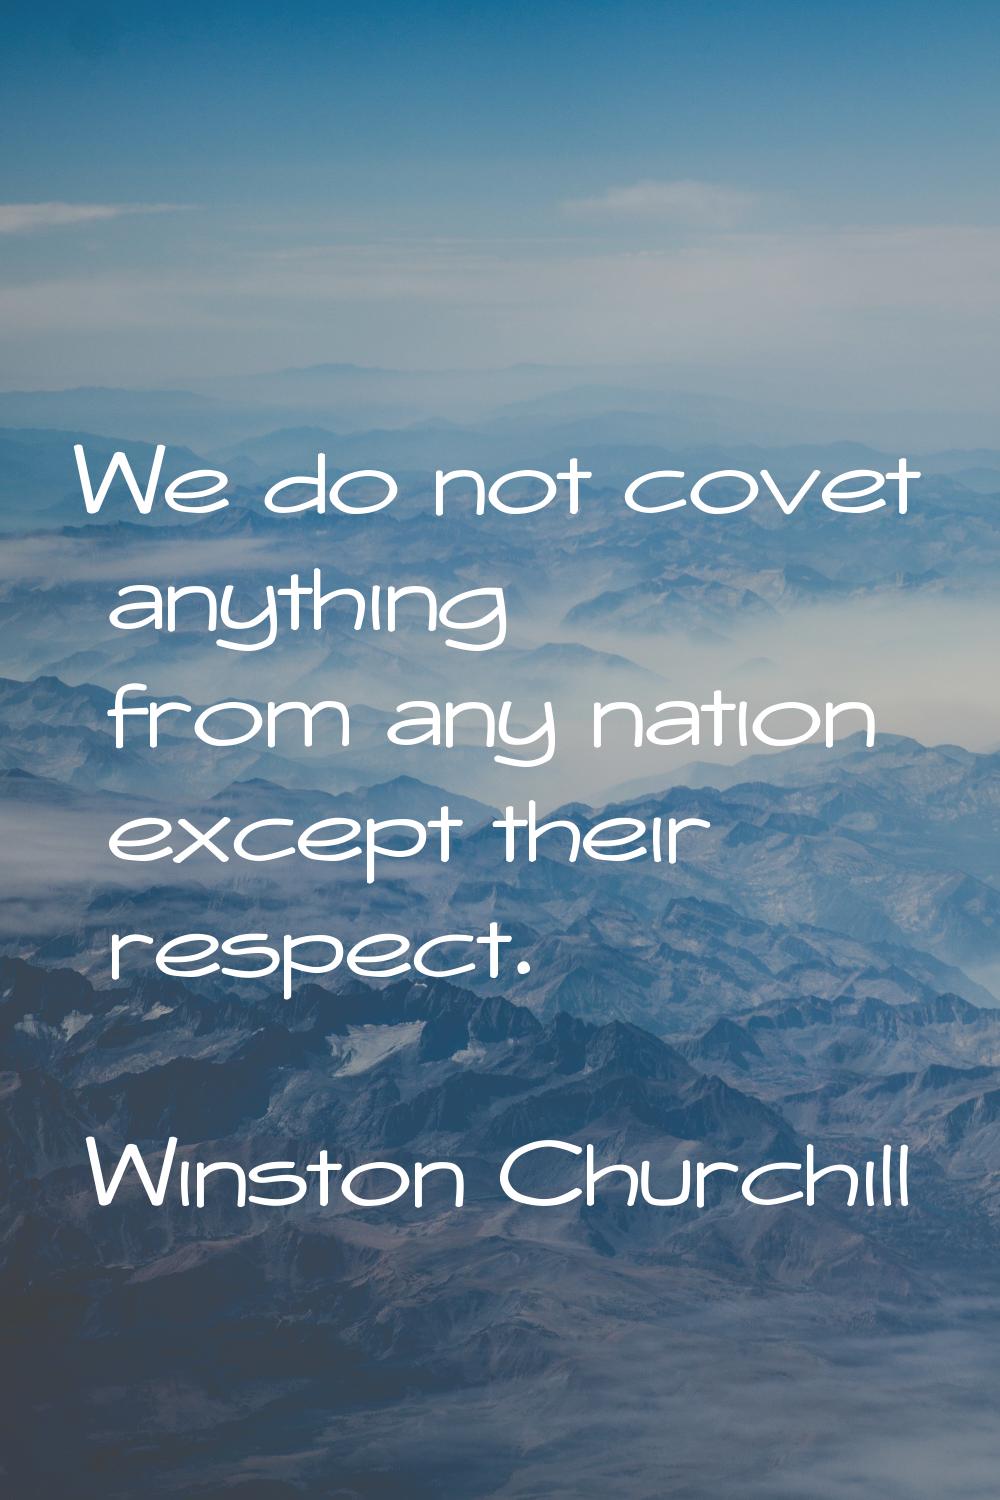 We do not covet anything from any nation except their respect.